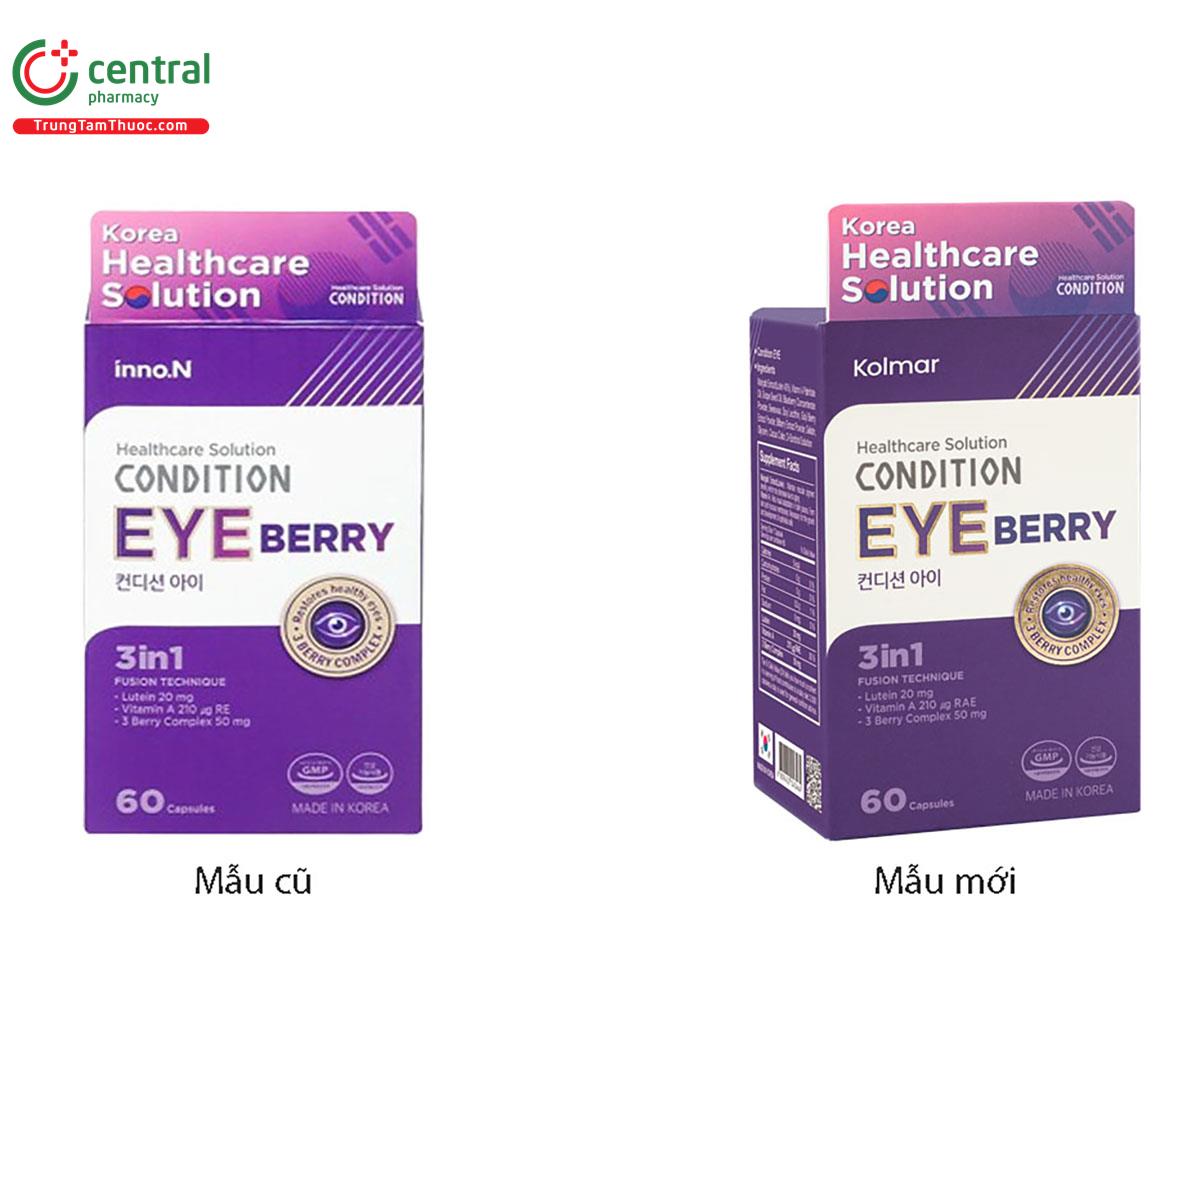 codition eye berry 2 S7481